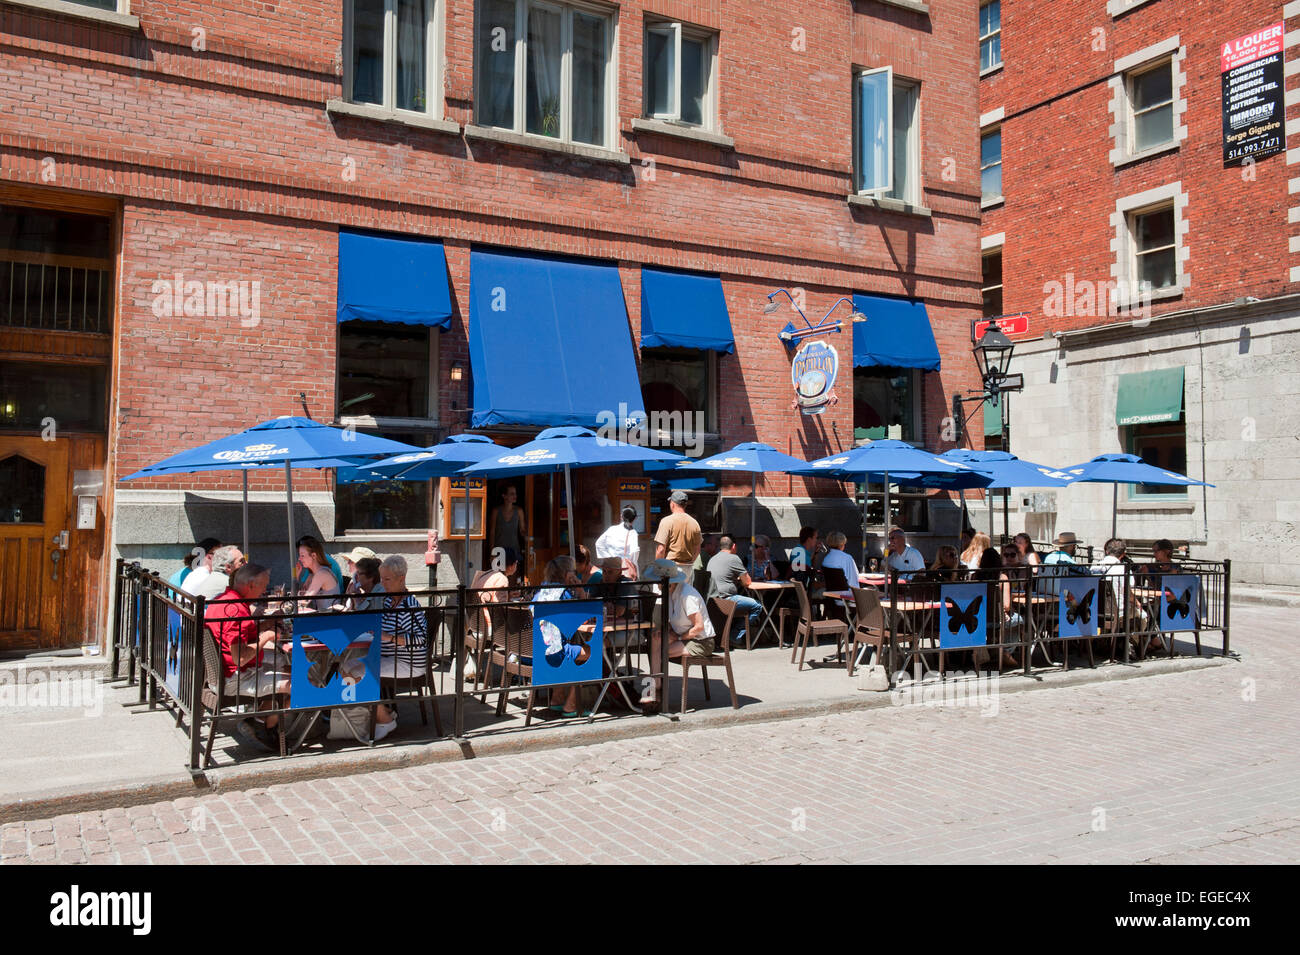 People eating on a terrace, Old Montreal, province of Quebec, Canada. Stock Photo